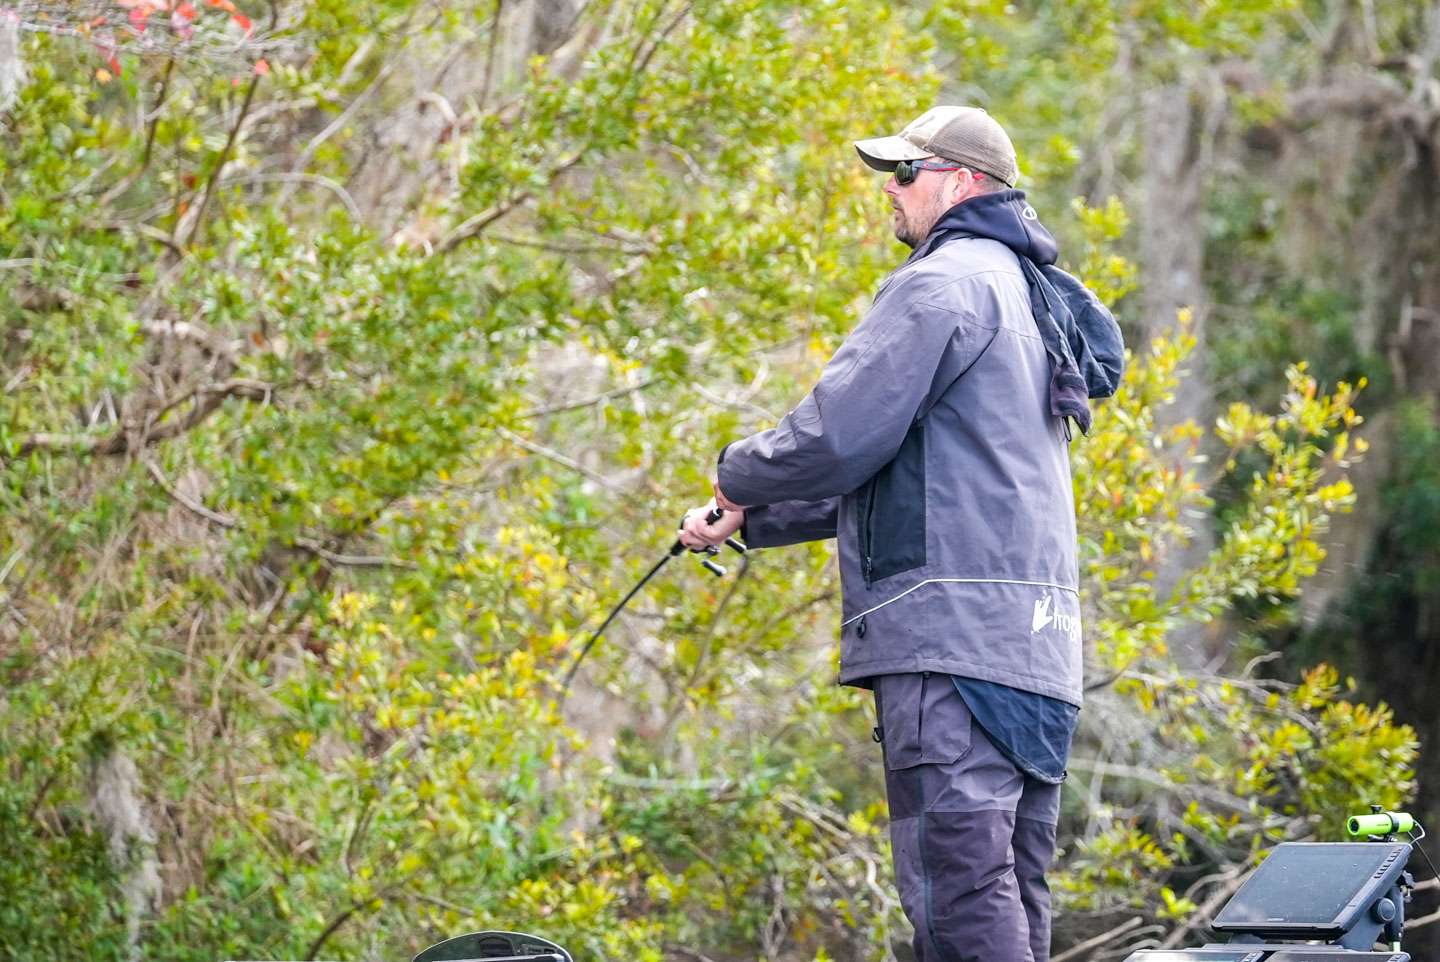 Dunns Creek is all about the current. With that said, Mullins is targeting anything that breaks the current such as trees, lay downs, undercut banks and lily pads. 